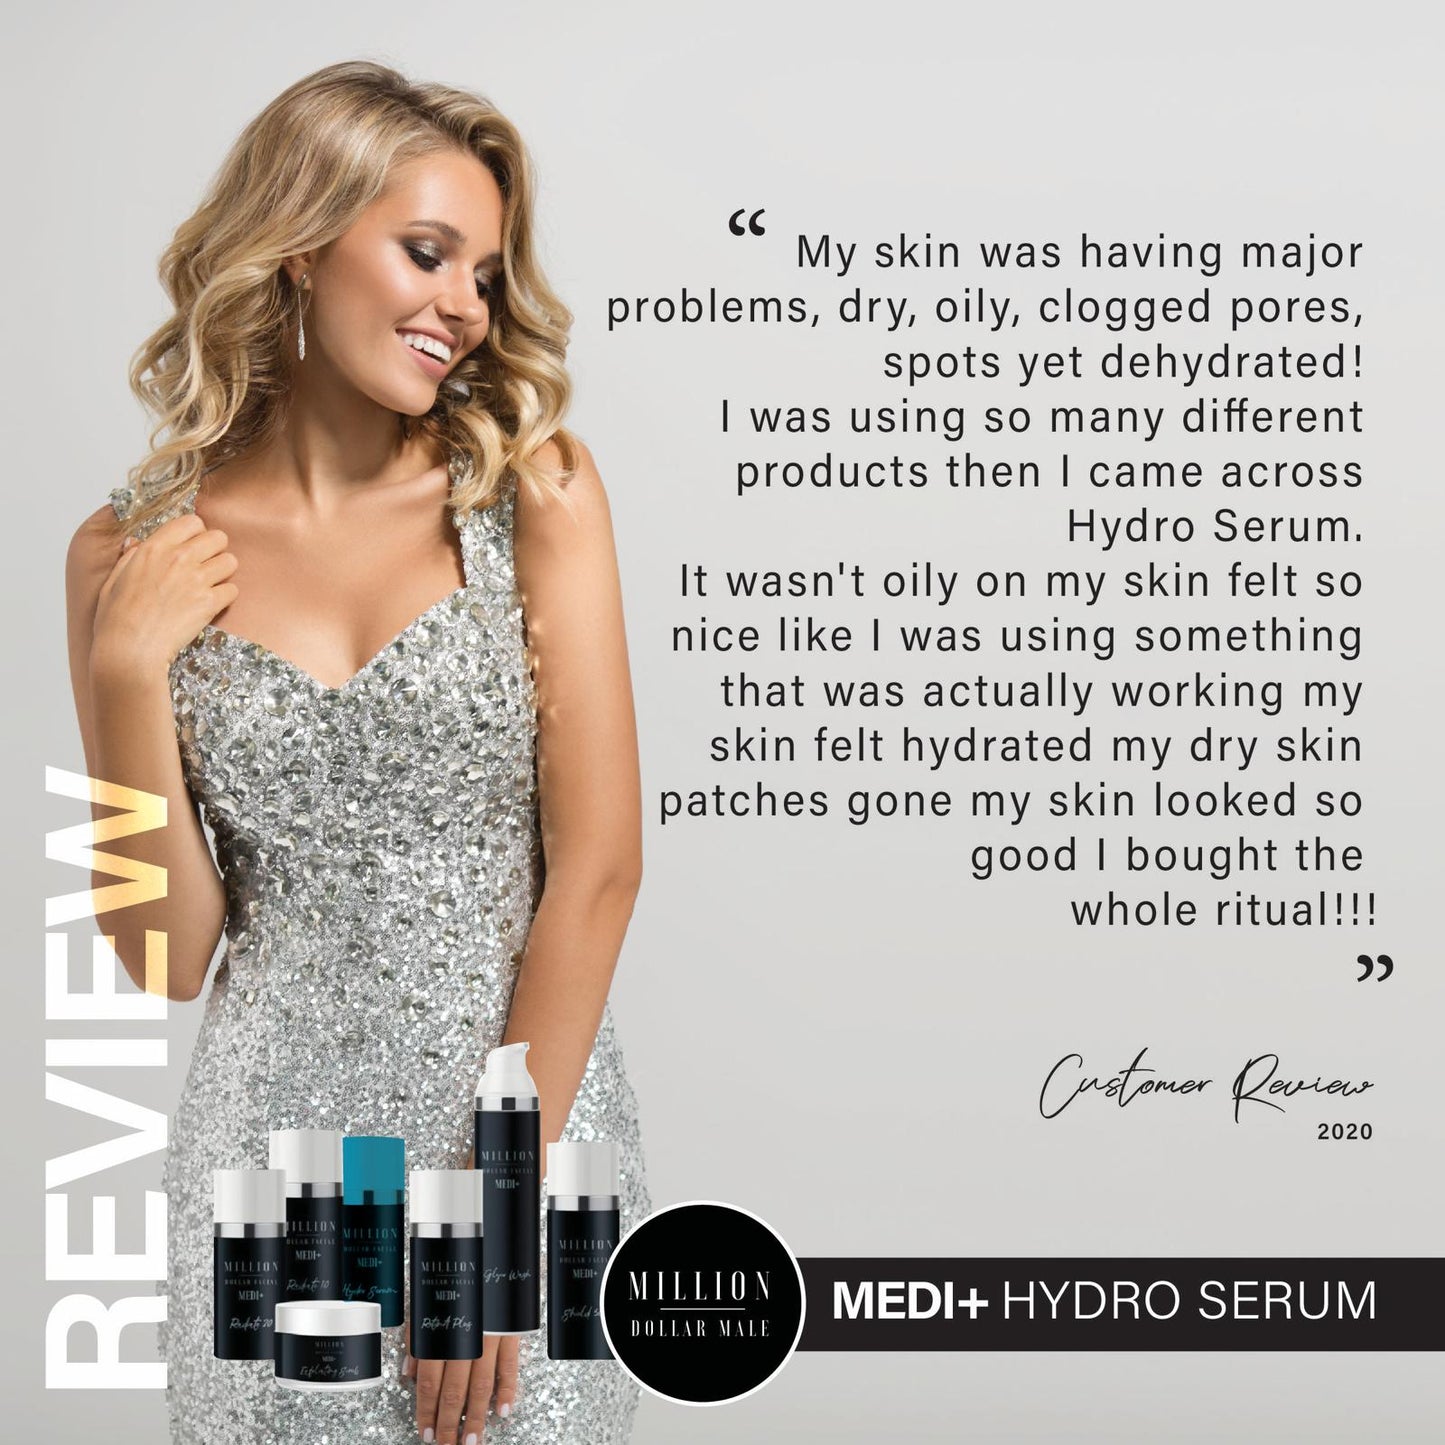 Medi+ Hydro Serum | Lightweight, hydrating serum for all skin types, ideal for oily skin